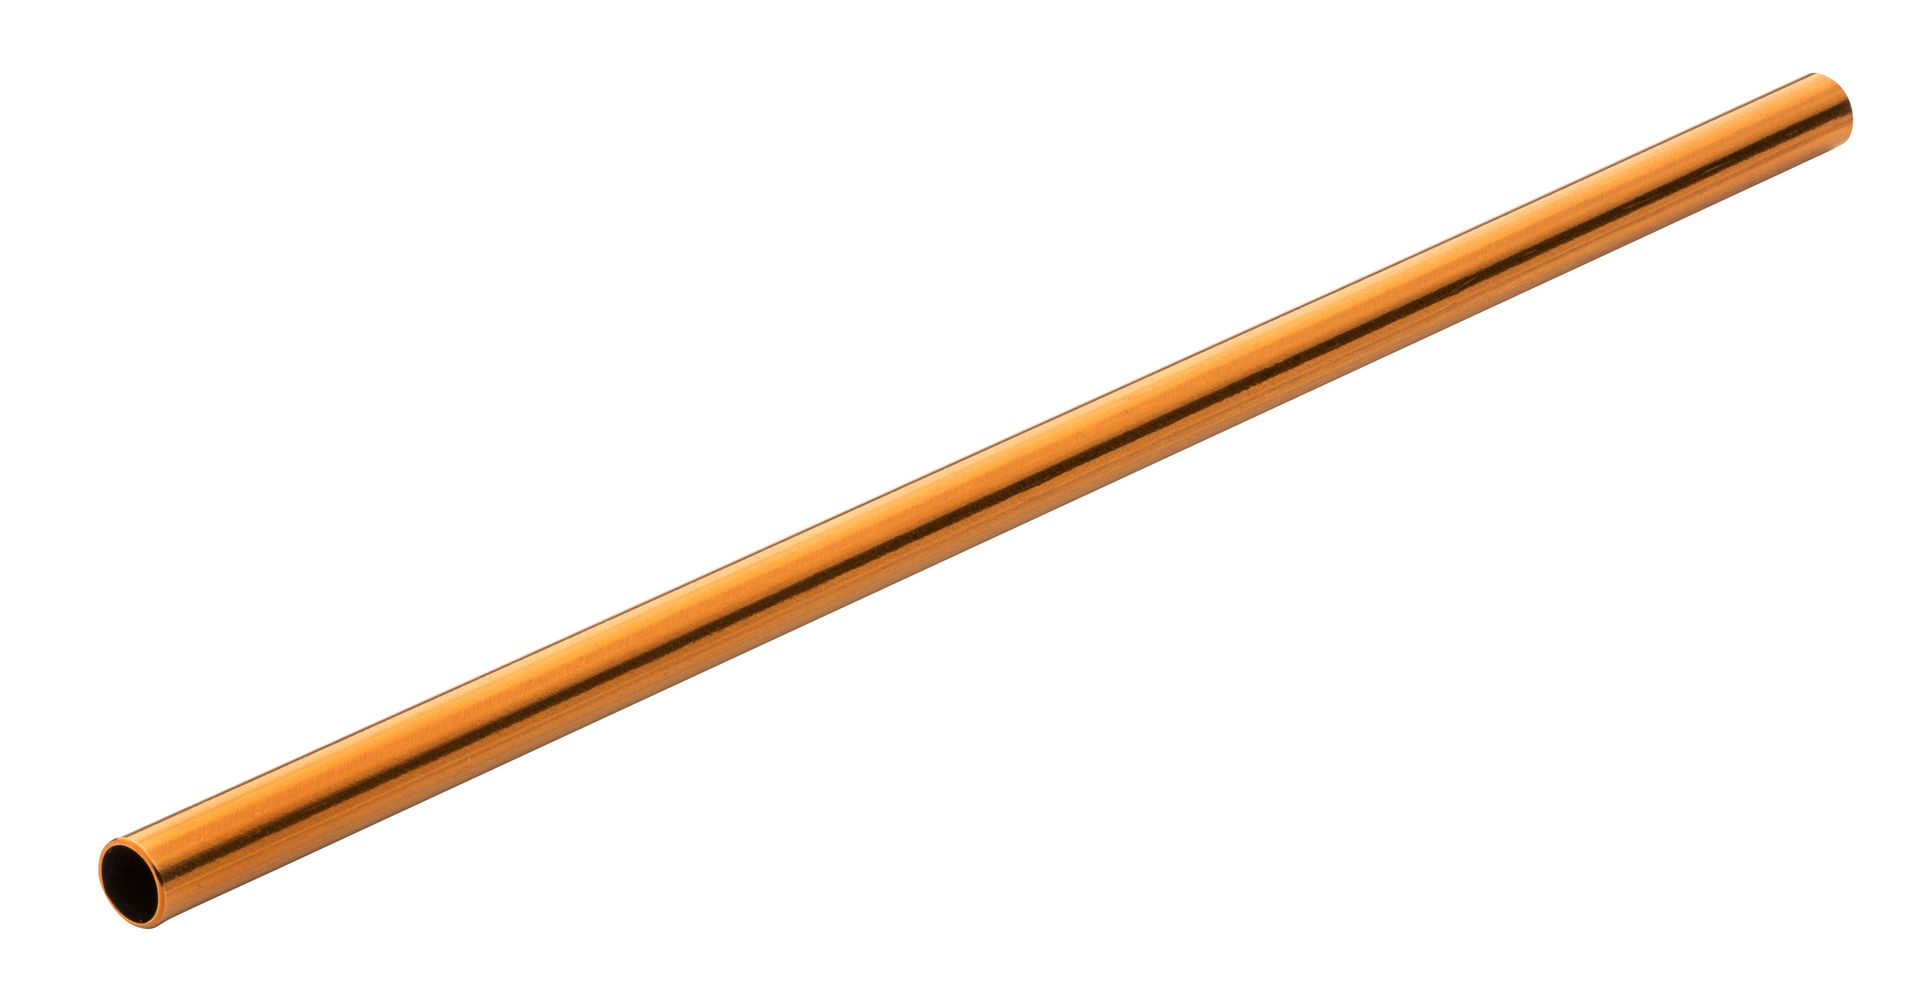 Stainless Steel Copper Cocktail Straw 5.5